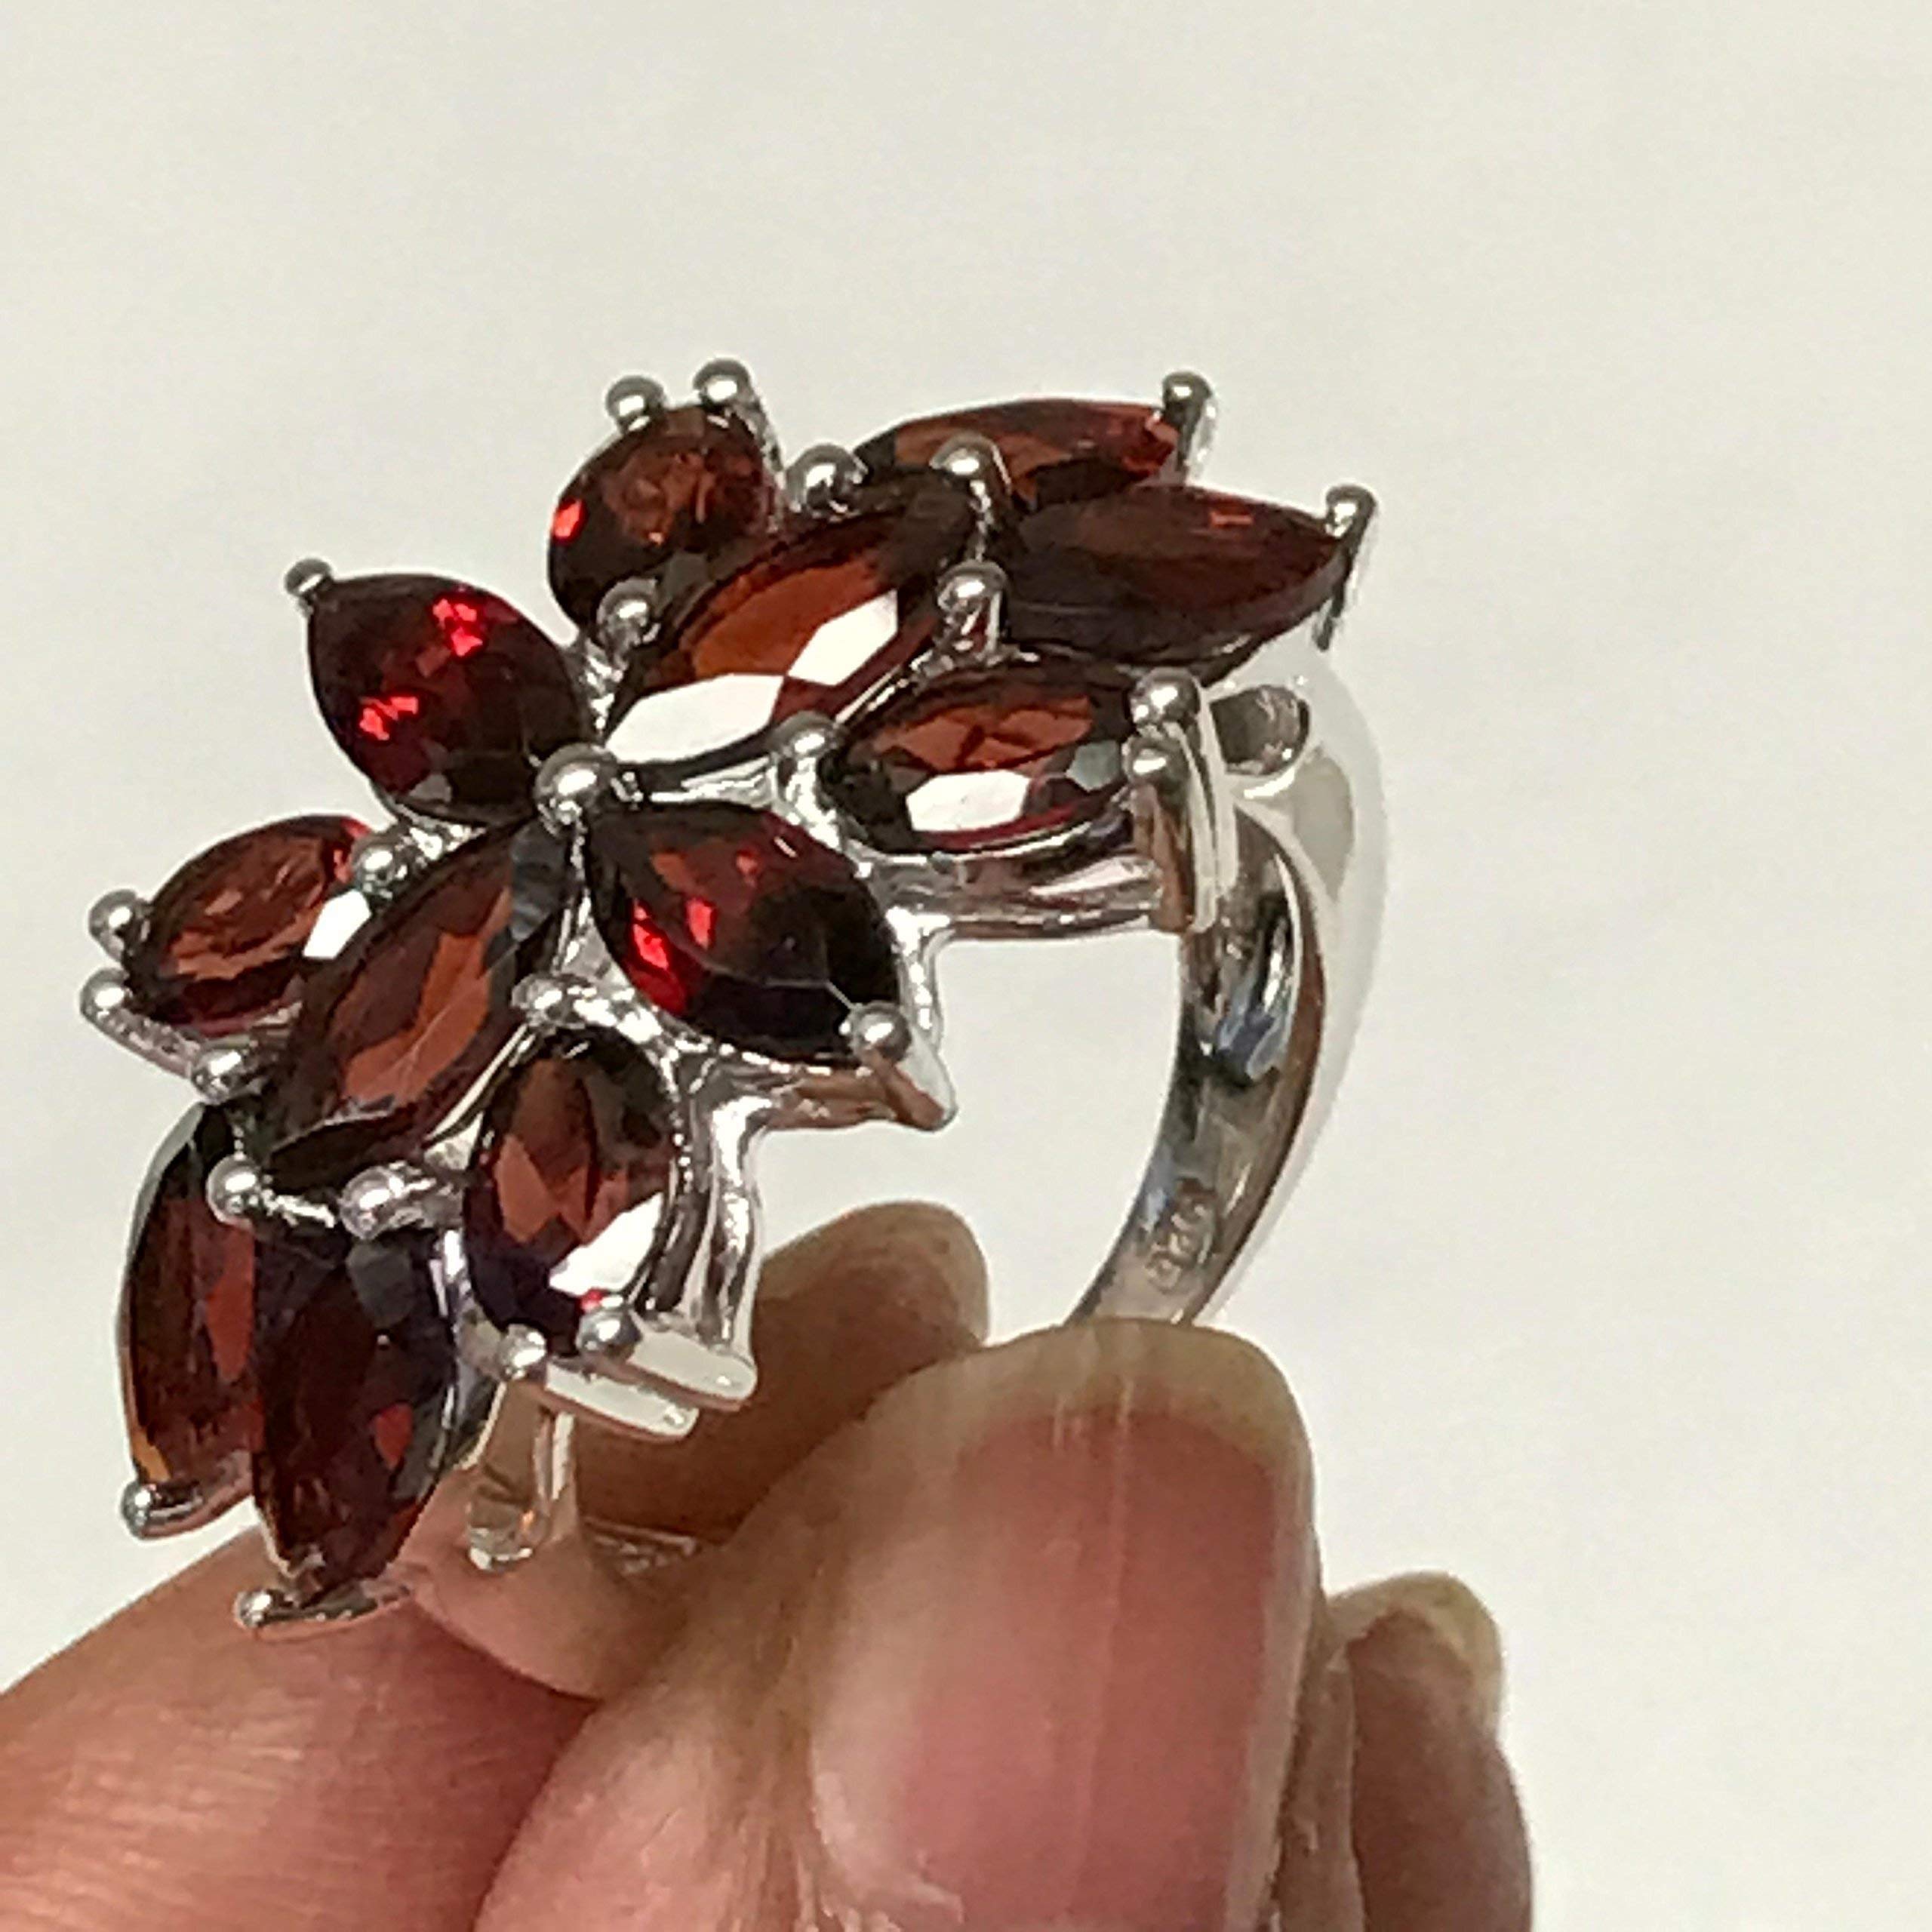 Natural 10ct Fire Garnet 925 Solid Sterling Silver Edwardian Style Ring Size 6, 8, 9 - Natural Rocks by Kala